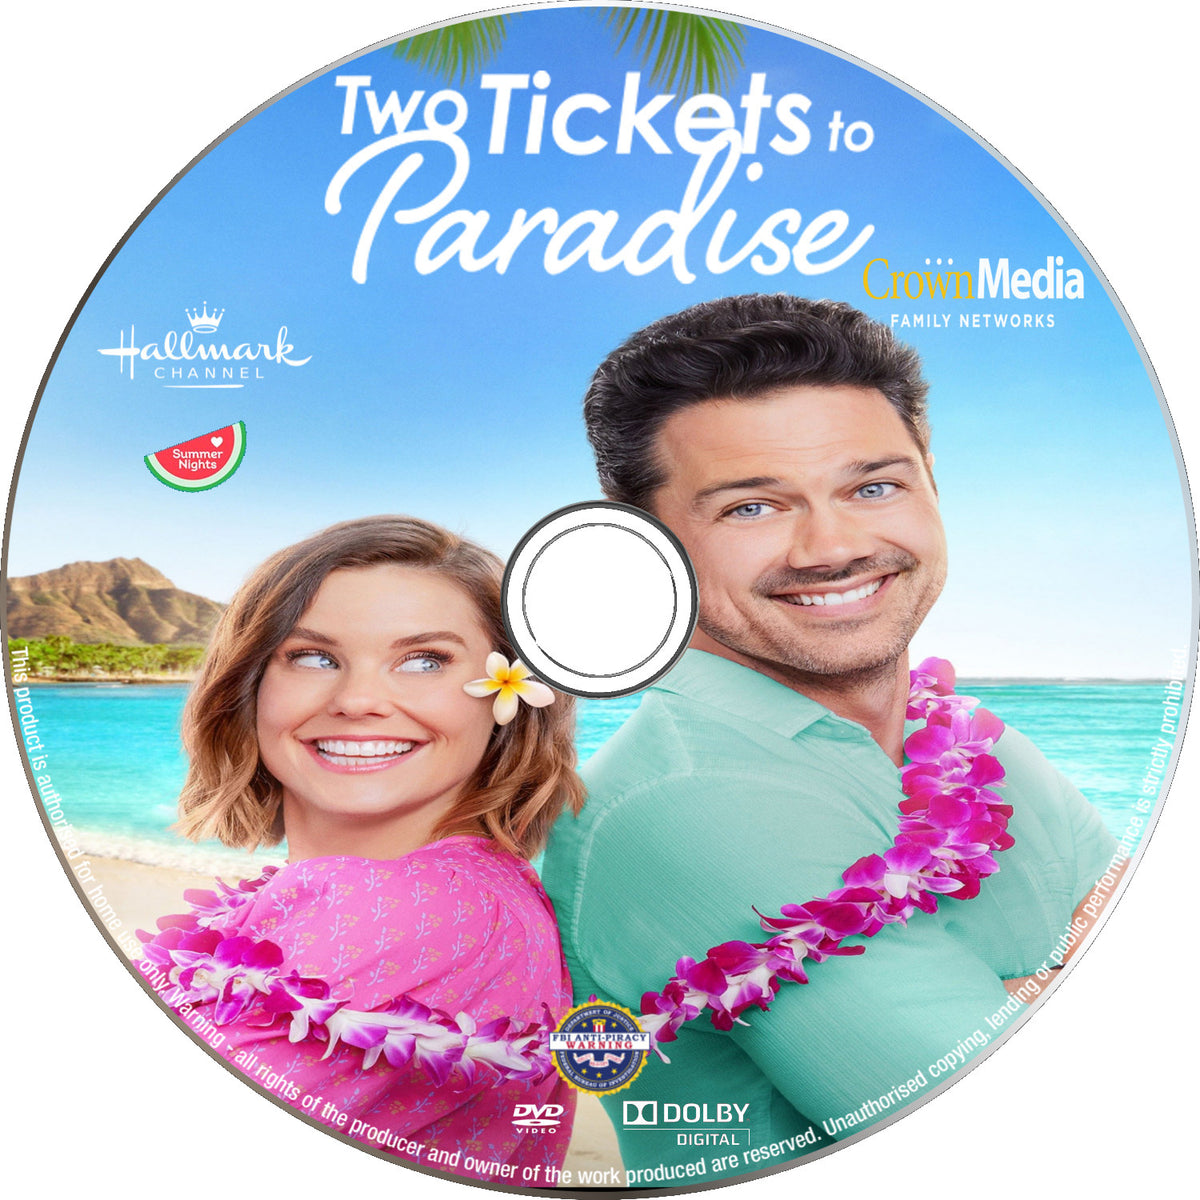 Loved Two Tickets to Paradise. Wasn't sure how the chemistry would be  between the polar opposites, but they crushed it. : r/HallmarkMovies